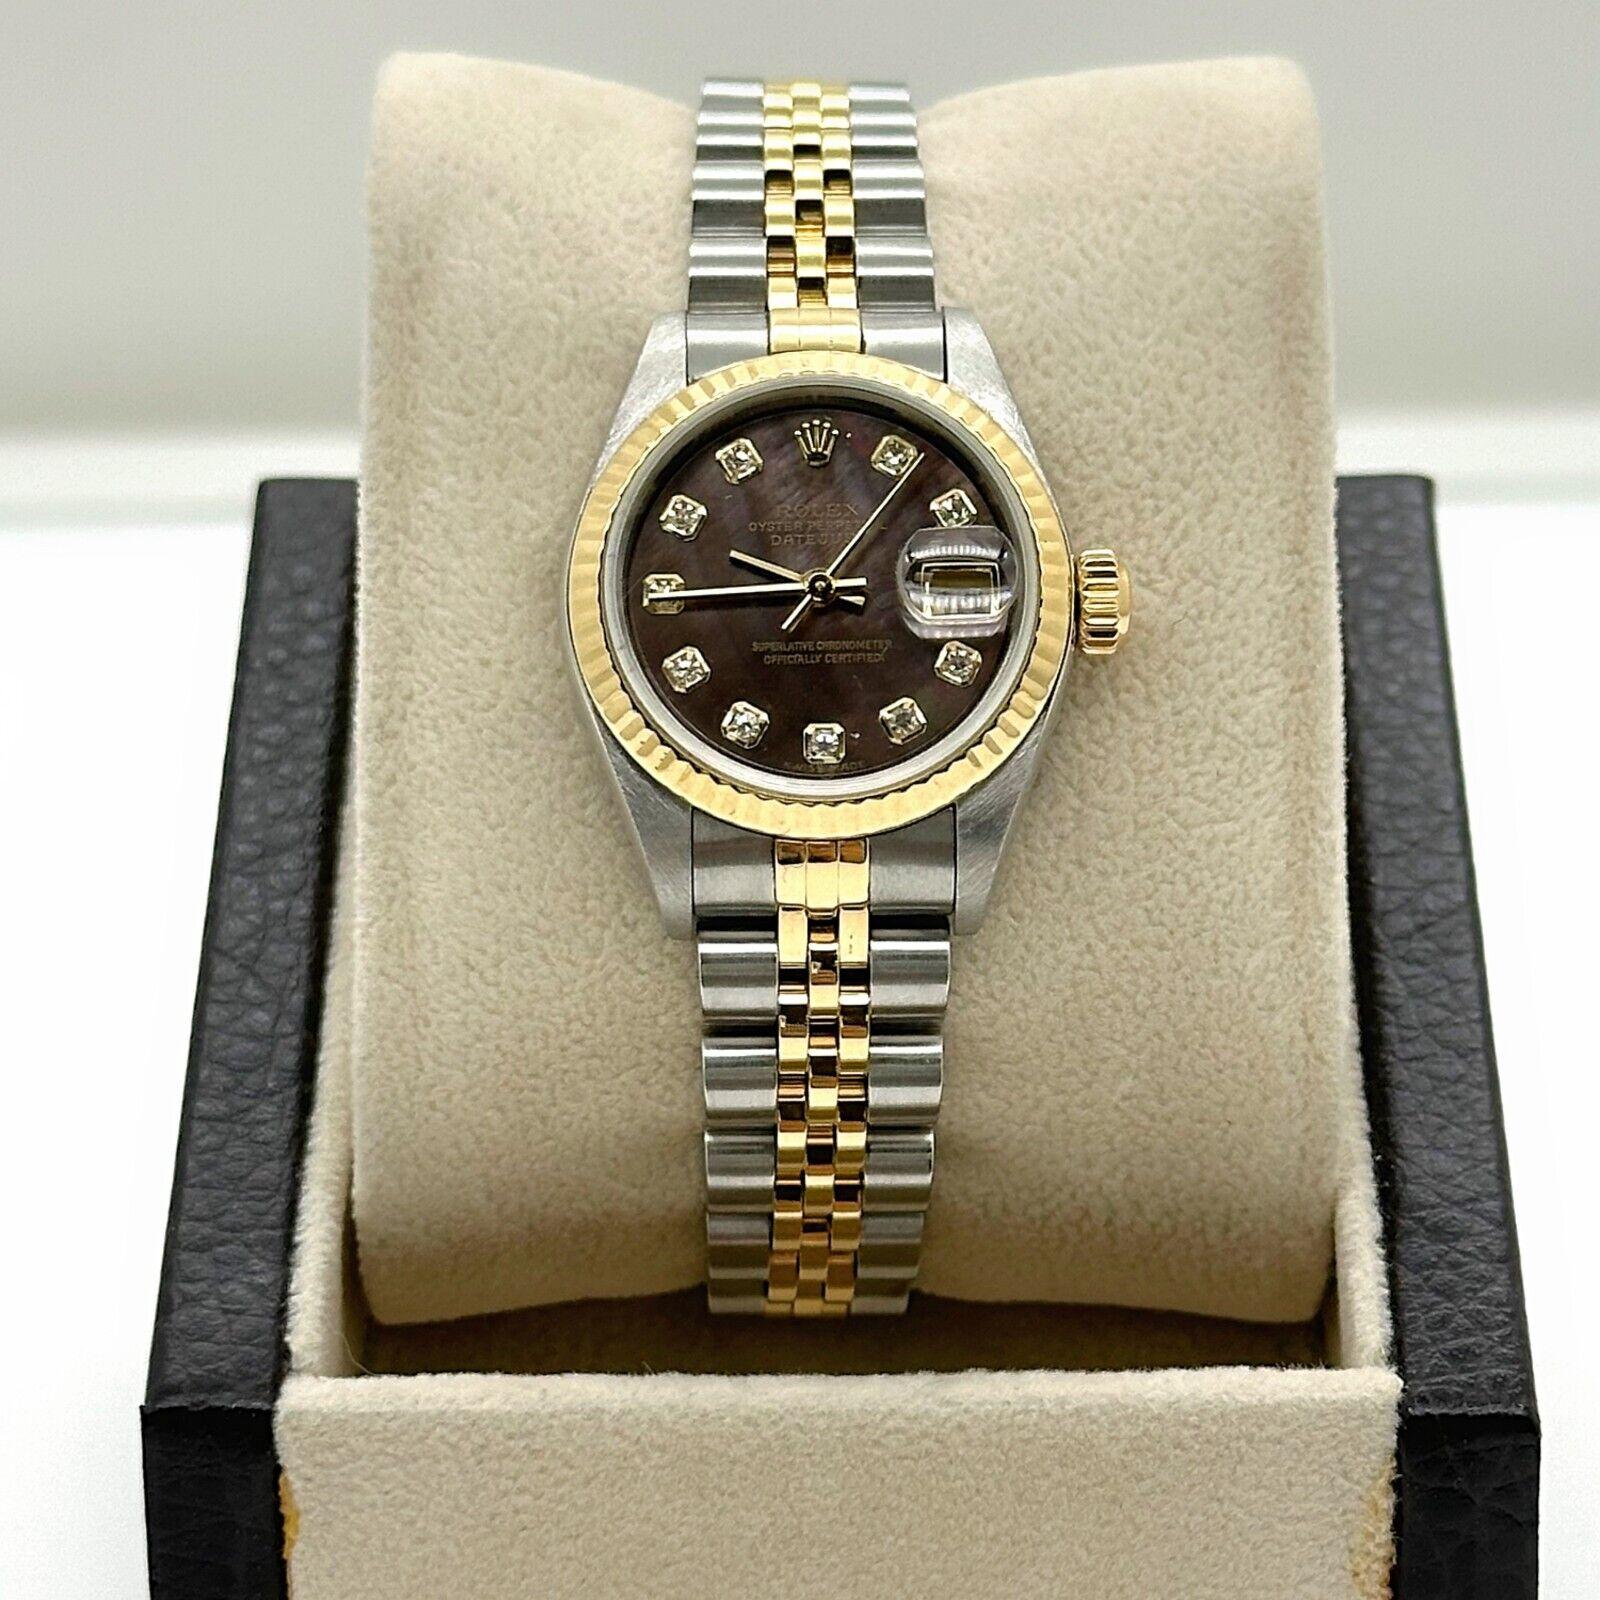 Style Number: 79173

Serial: A834217

Year: 2000

Model: Ladies Datejust

Case Material: Stainless Steel

Band: 18K Yellow Gold and Stainless Steel

Bezel: 18K Yellow Gold 

Dial: Original Factory Tahitian MOP Diamond Dial

Face: Sapphire